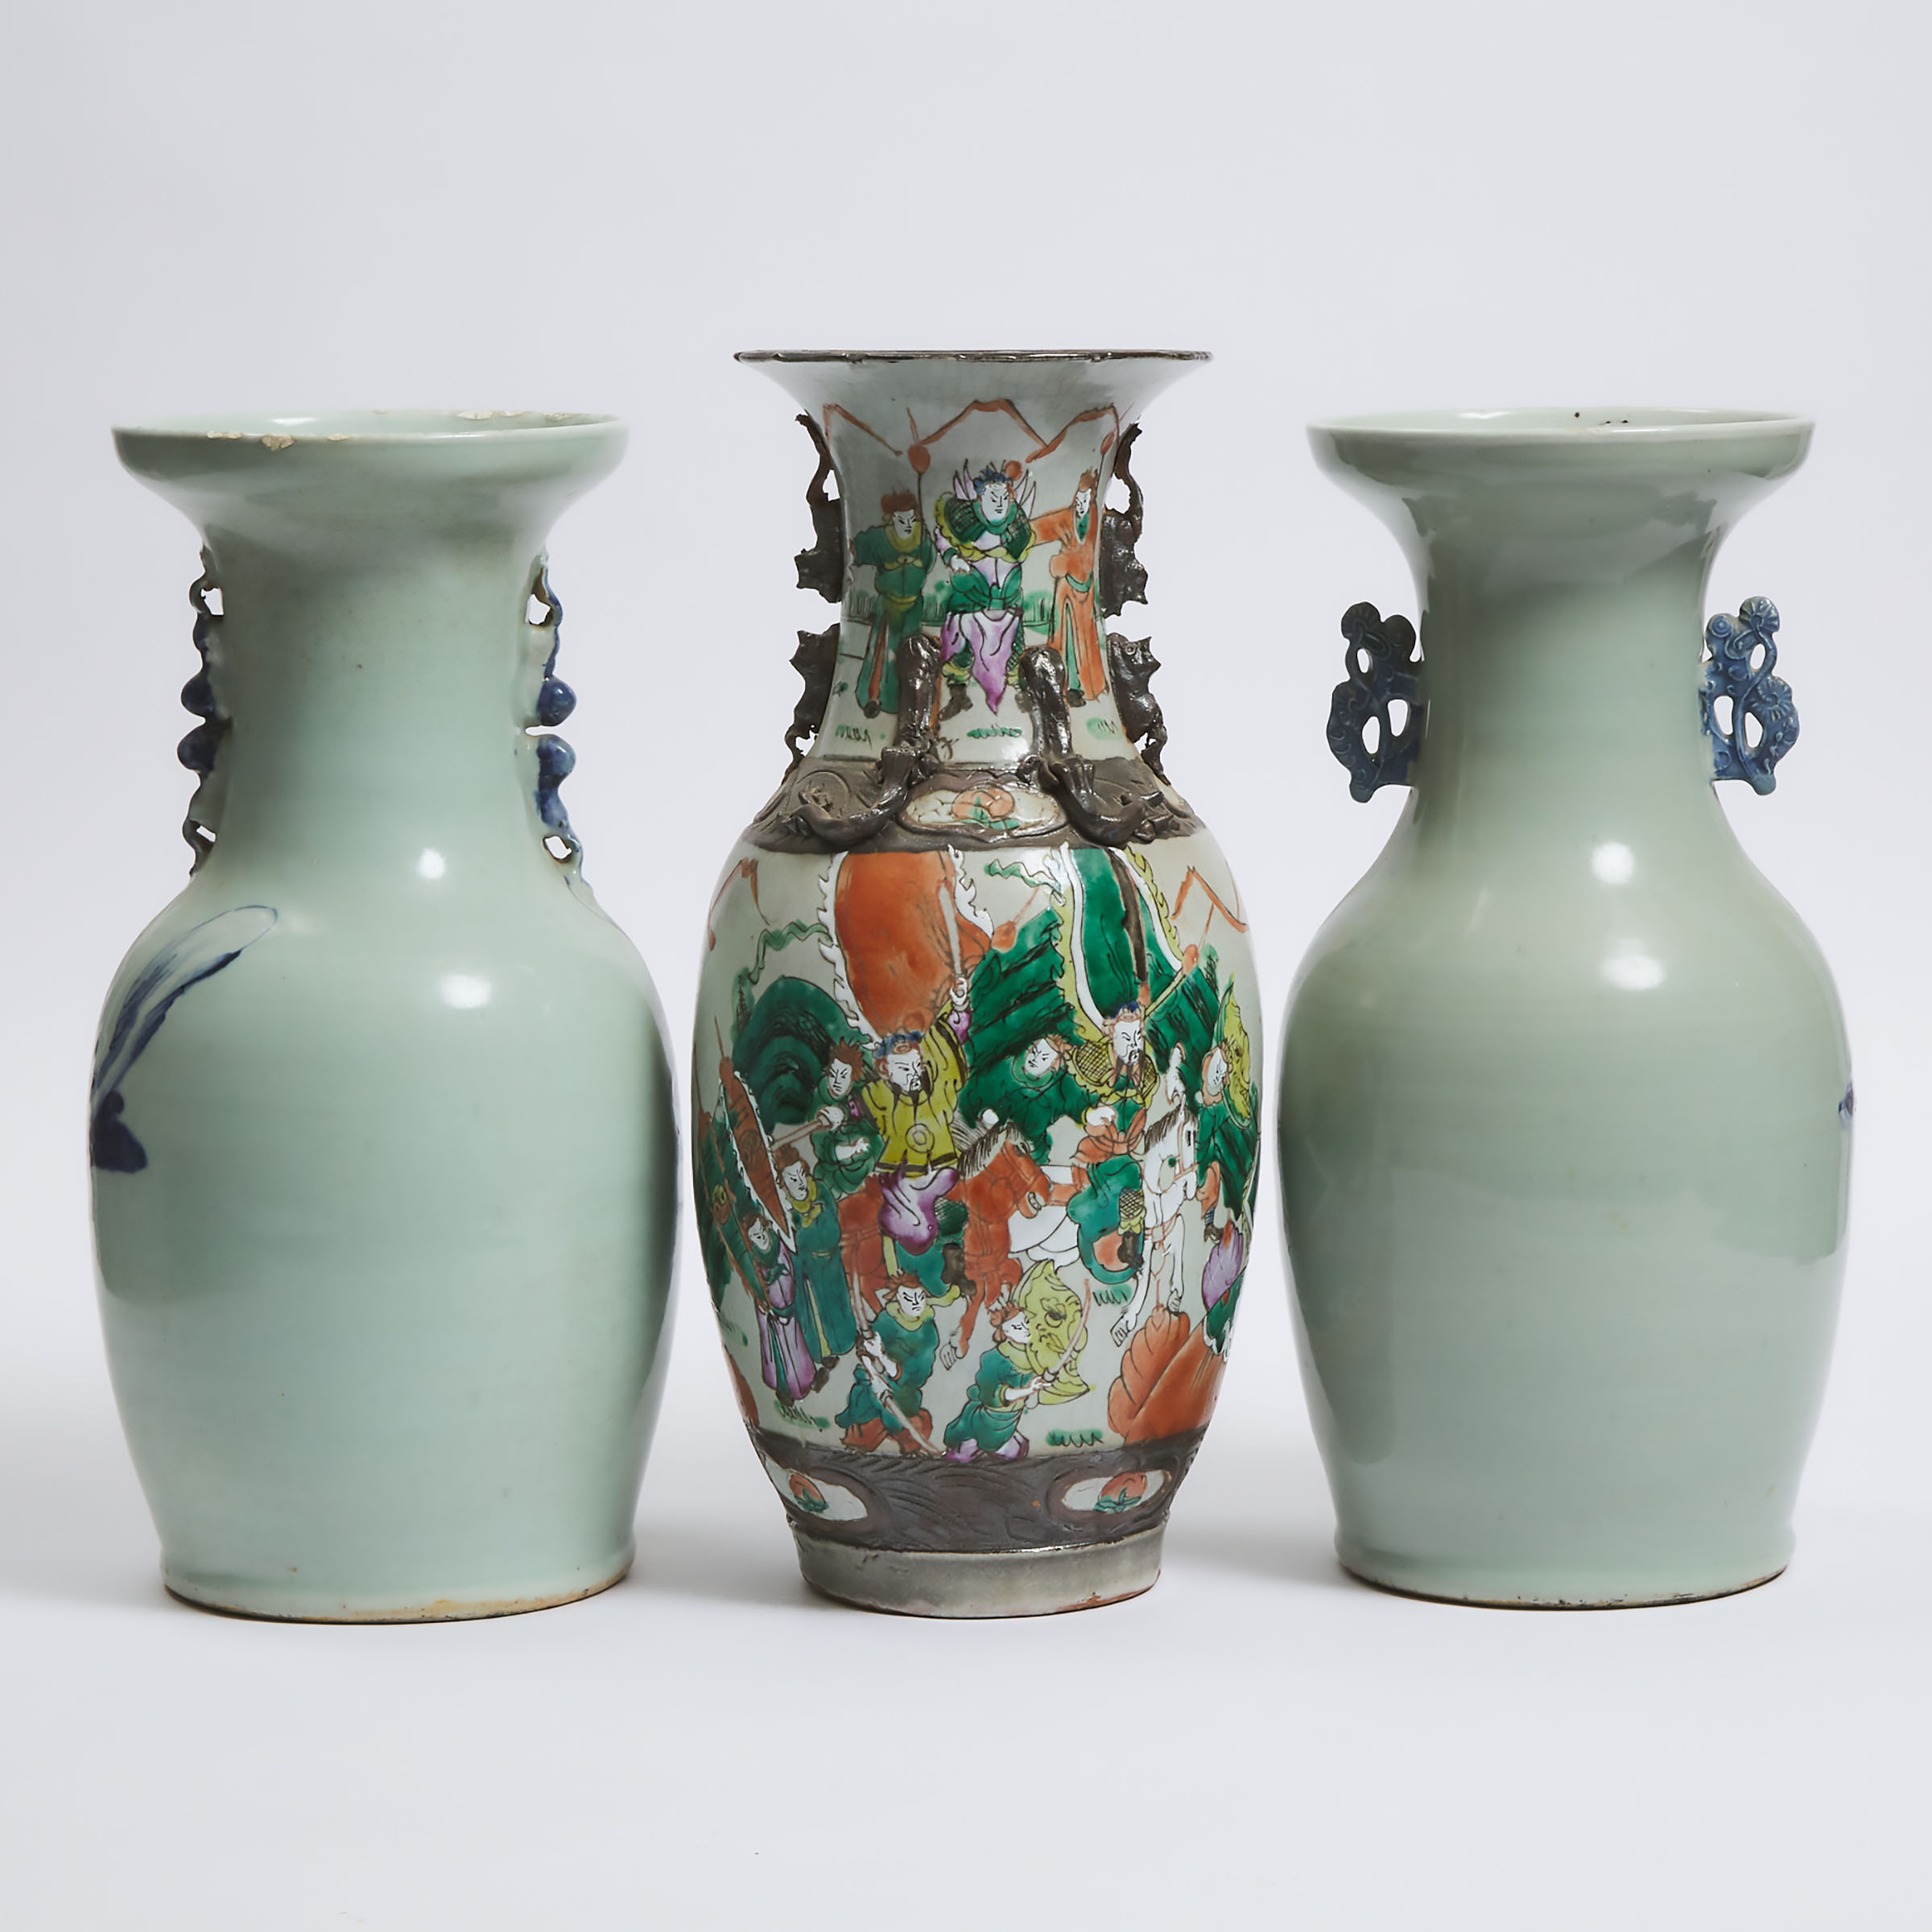 A Group of Three Chinese Baluster Vases, 19th Century